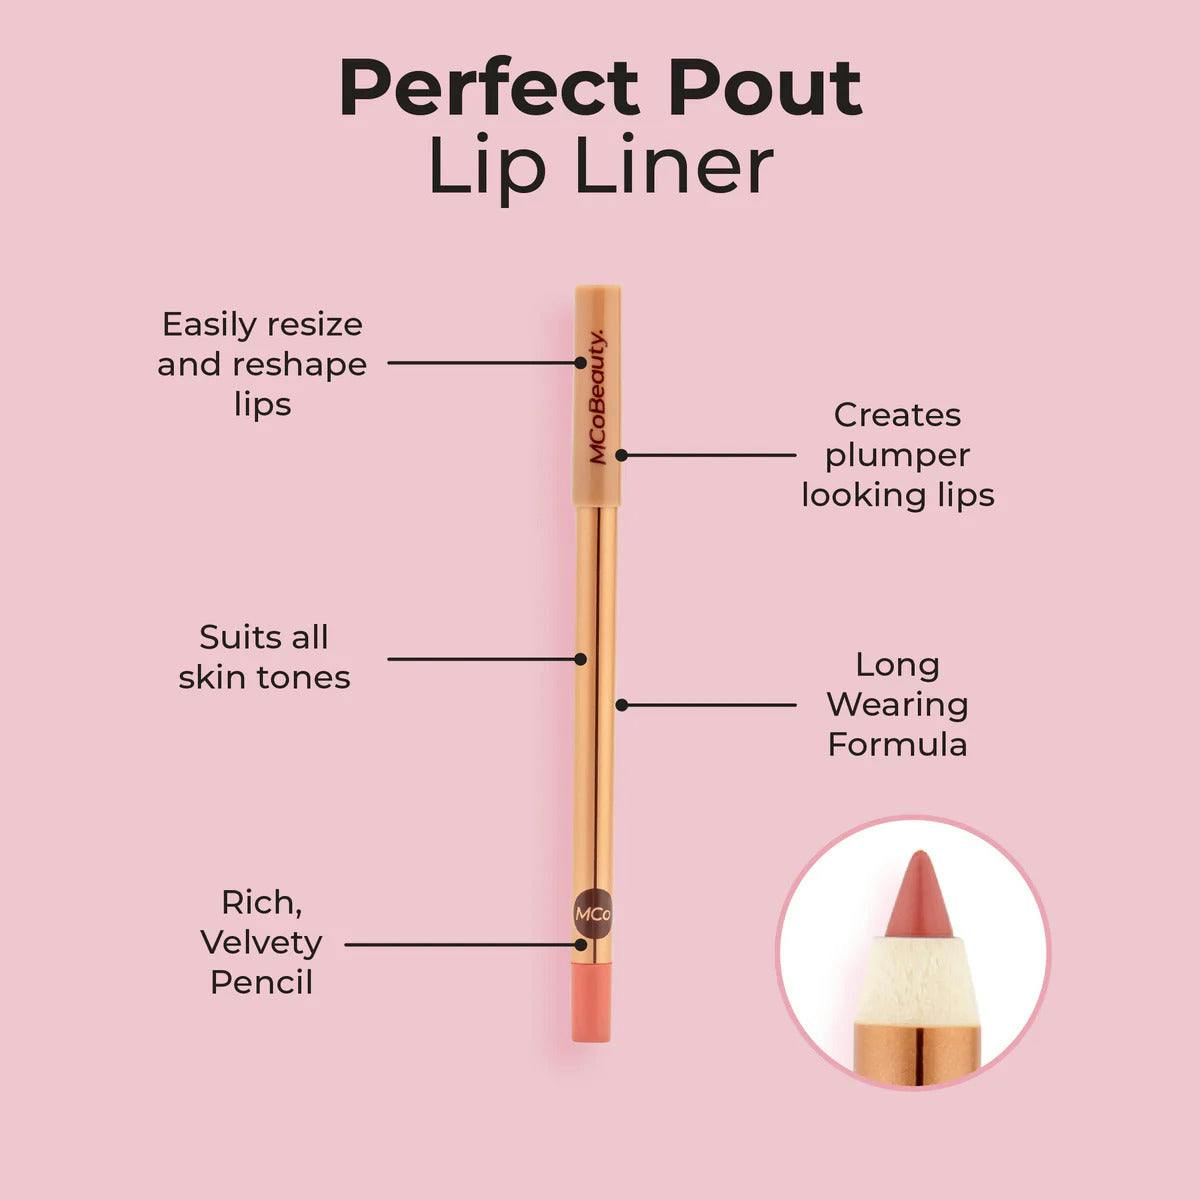 MCoBeauty Perfect Pout Lip Liner - Rose Saturn 1.3g